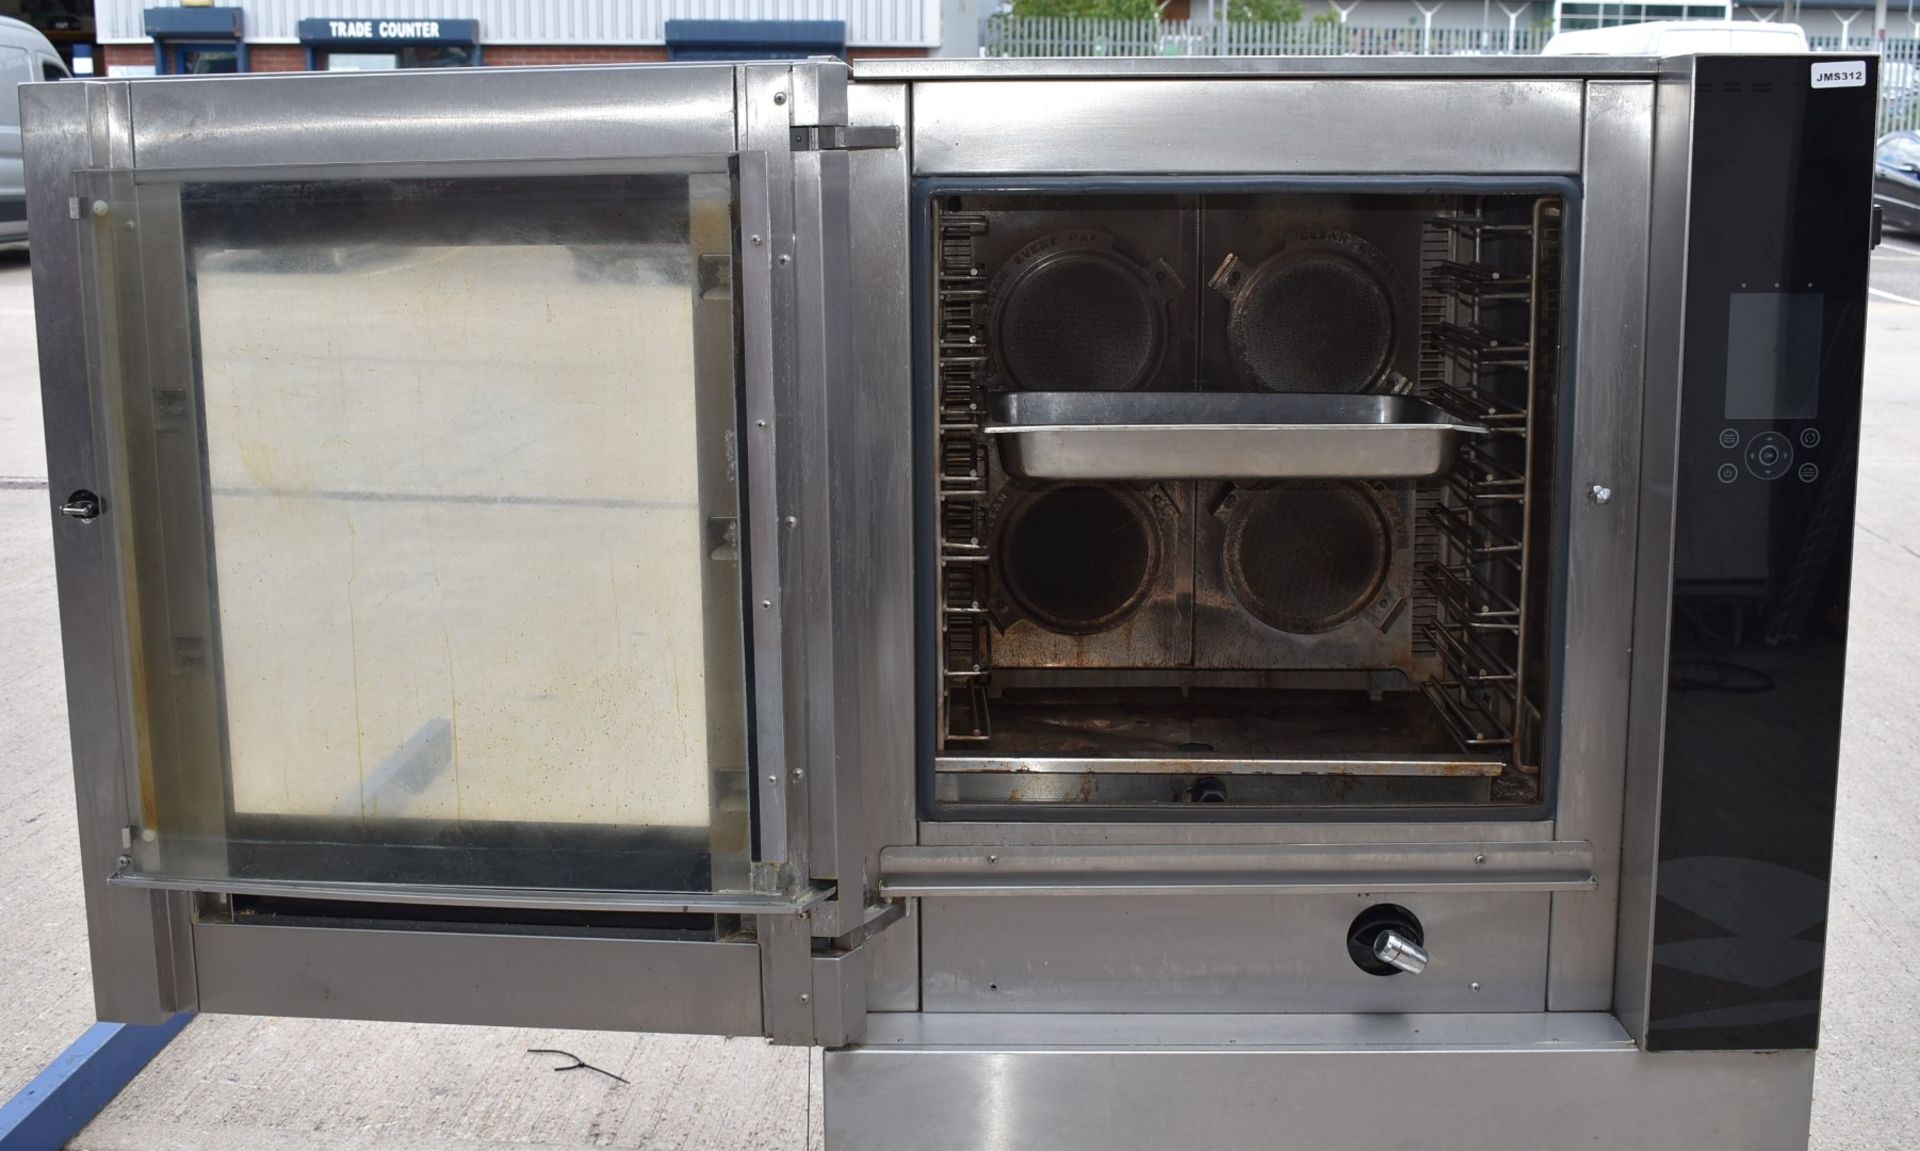 1 x Fri-Jado Turbo Retail 8 Grid Combi Oven - 3 Phase Combi Oven With Various Cooking Programs - Image 17 of 24